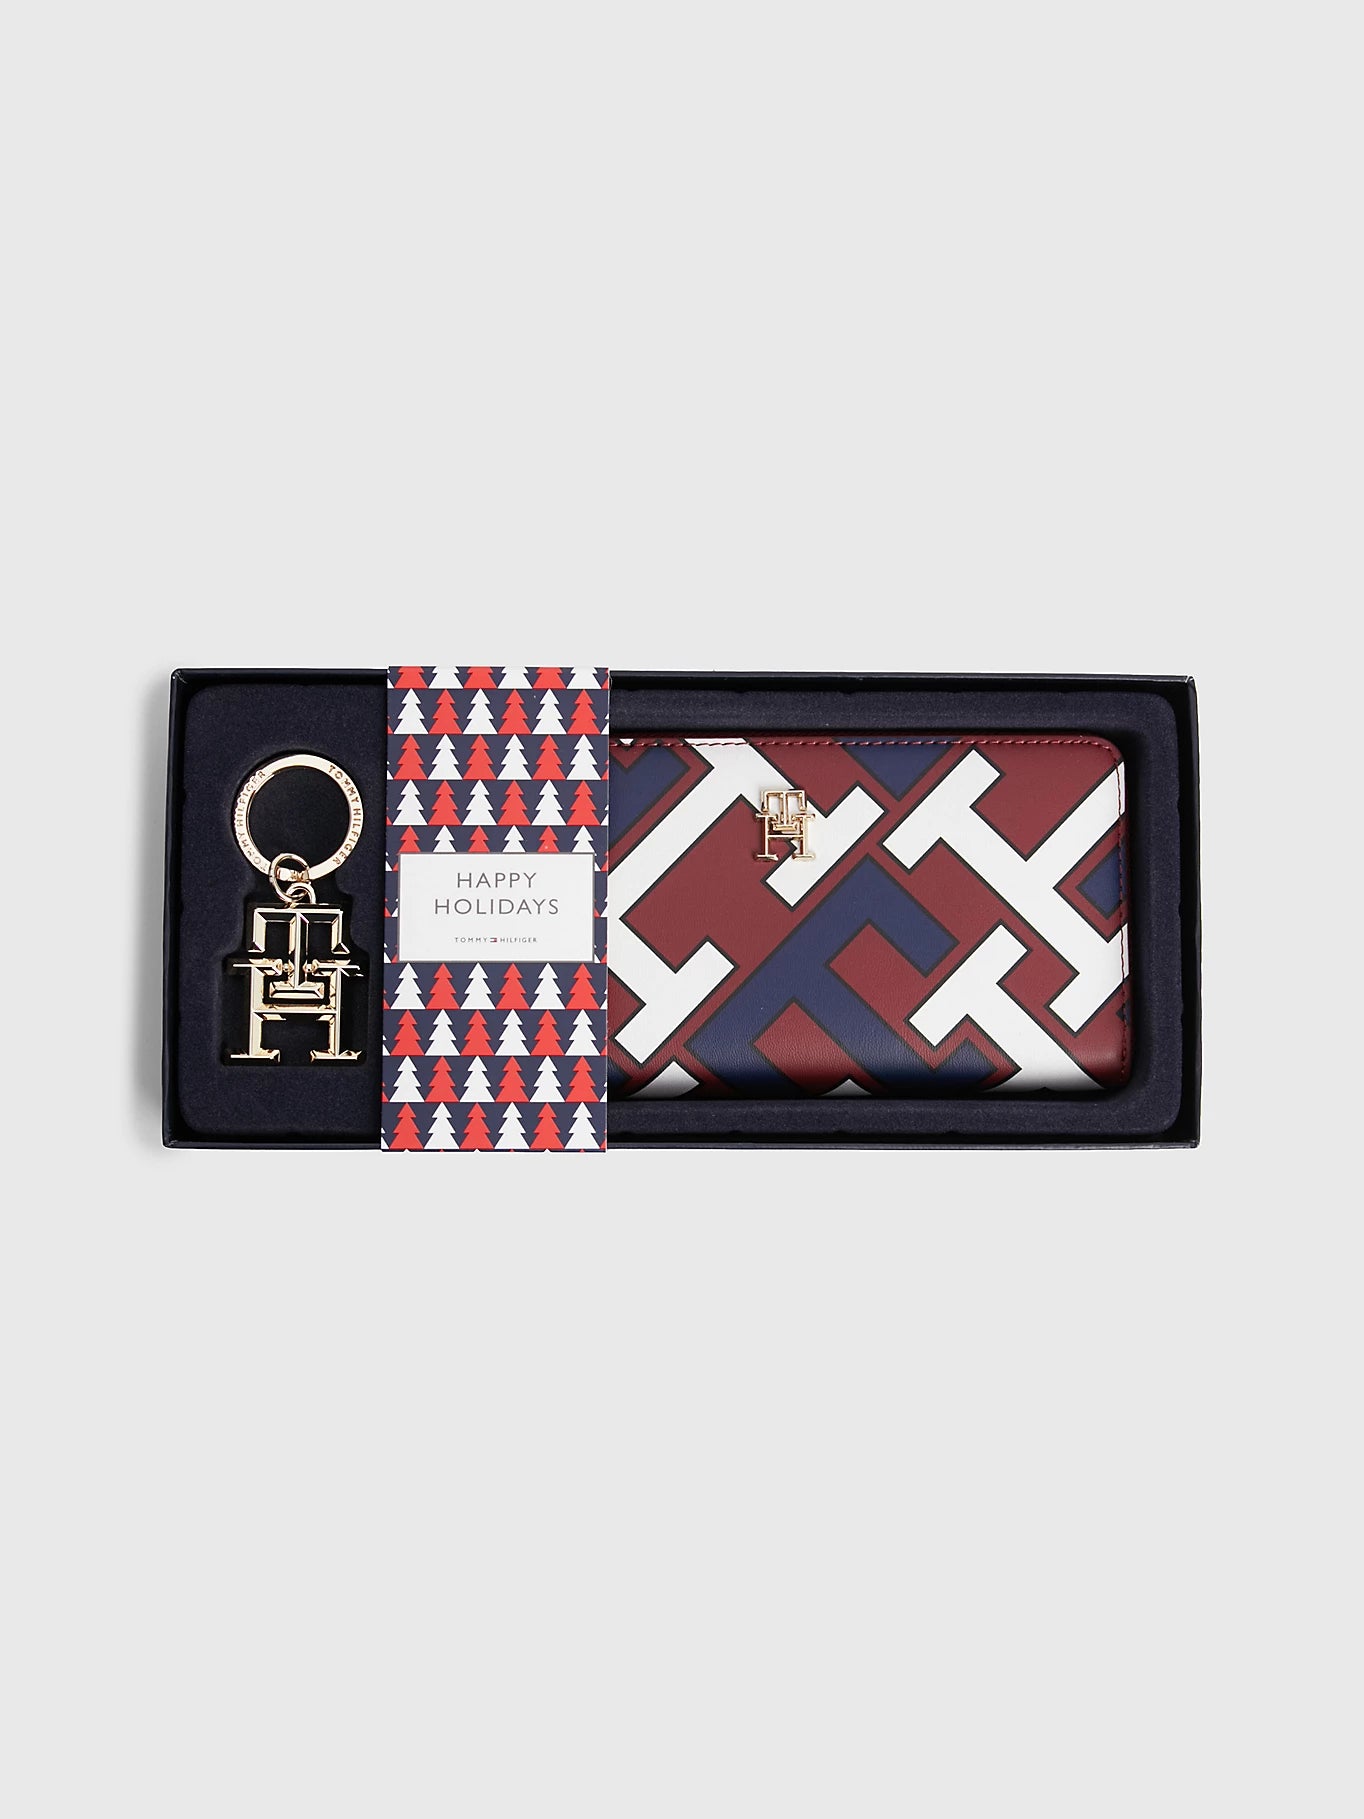 ICONIC MONOGRAM WALLET AND KEY FOB GIFT SET